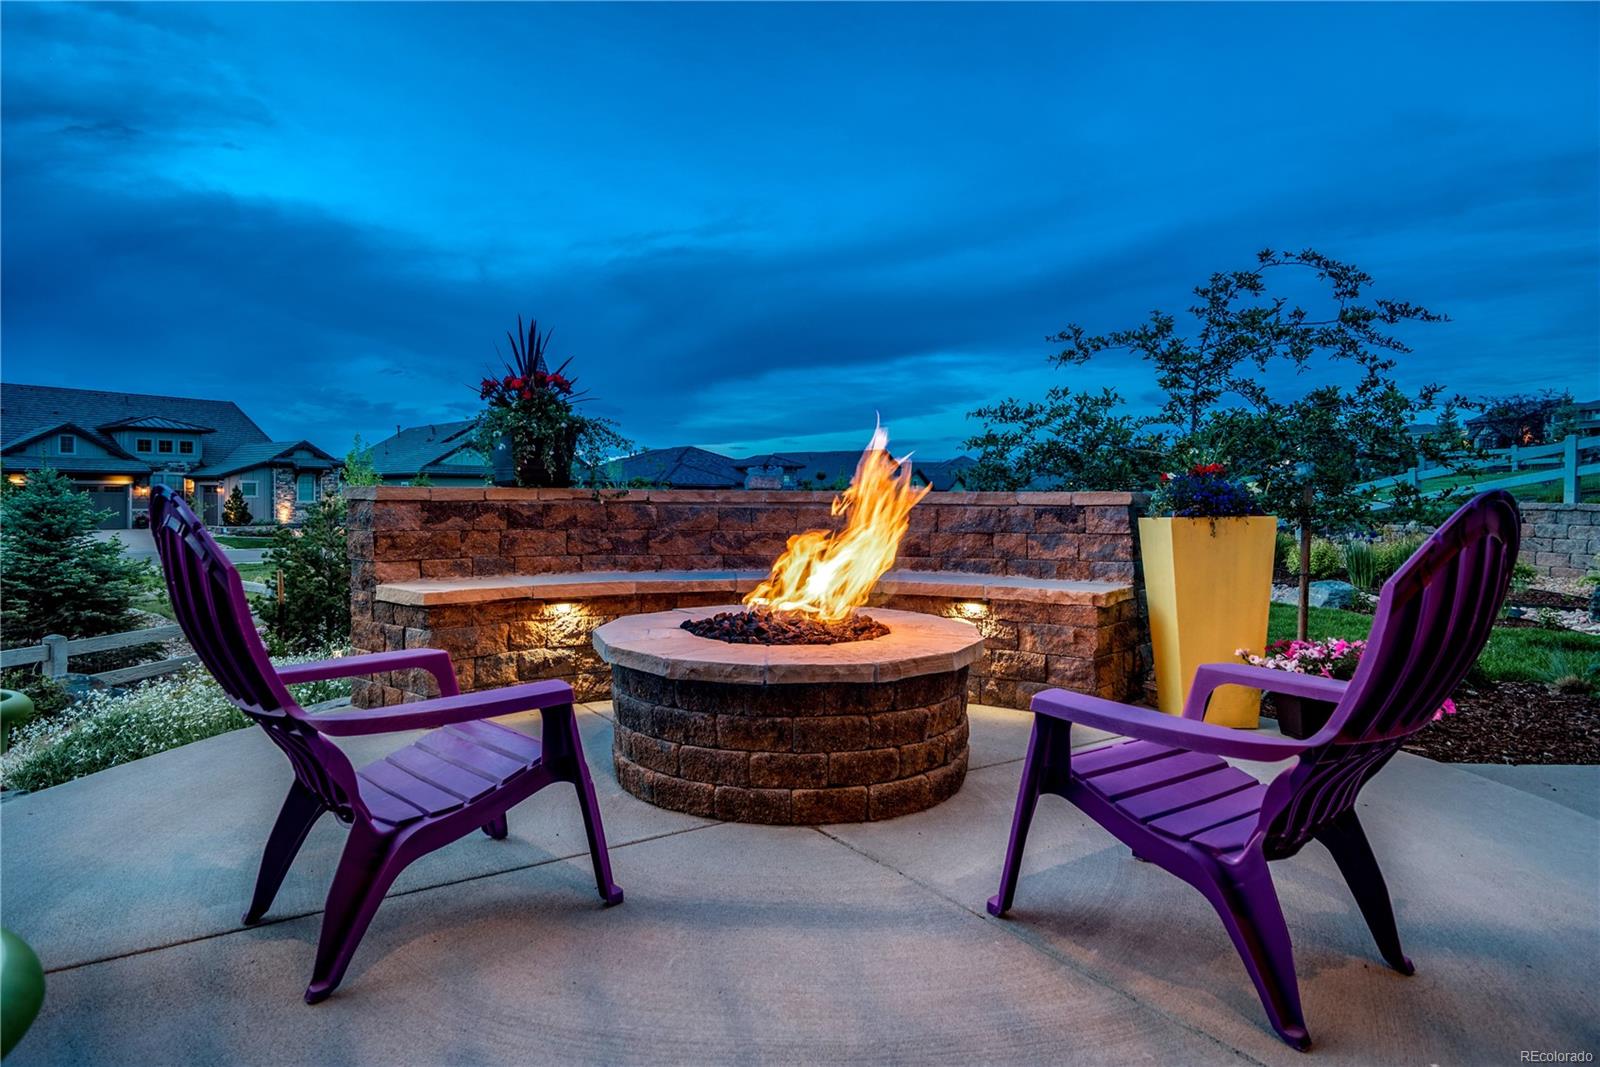 Extended privacy patio with beautiful gas fire pit.